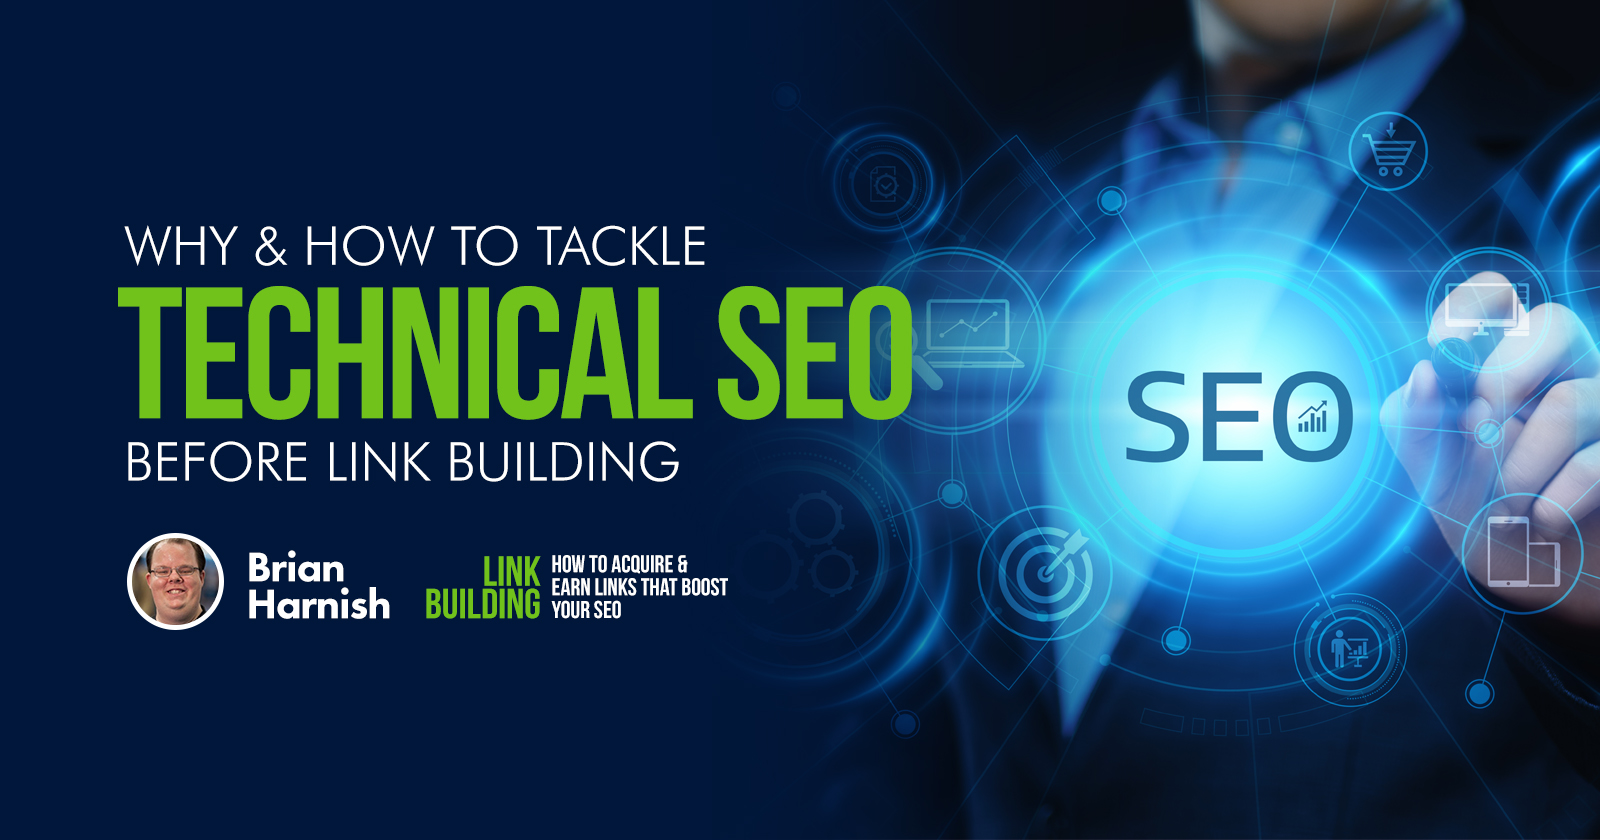 Why & How to Tackle Technical SEO Before Link Building